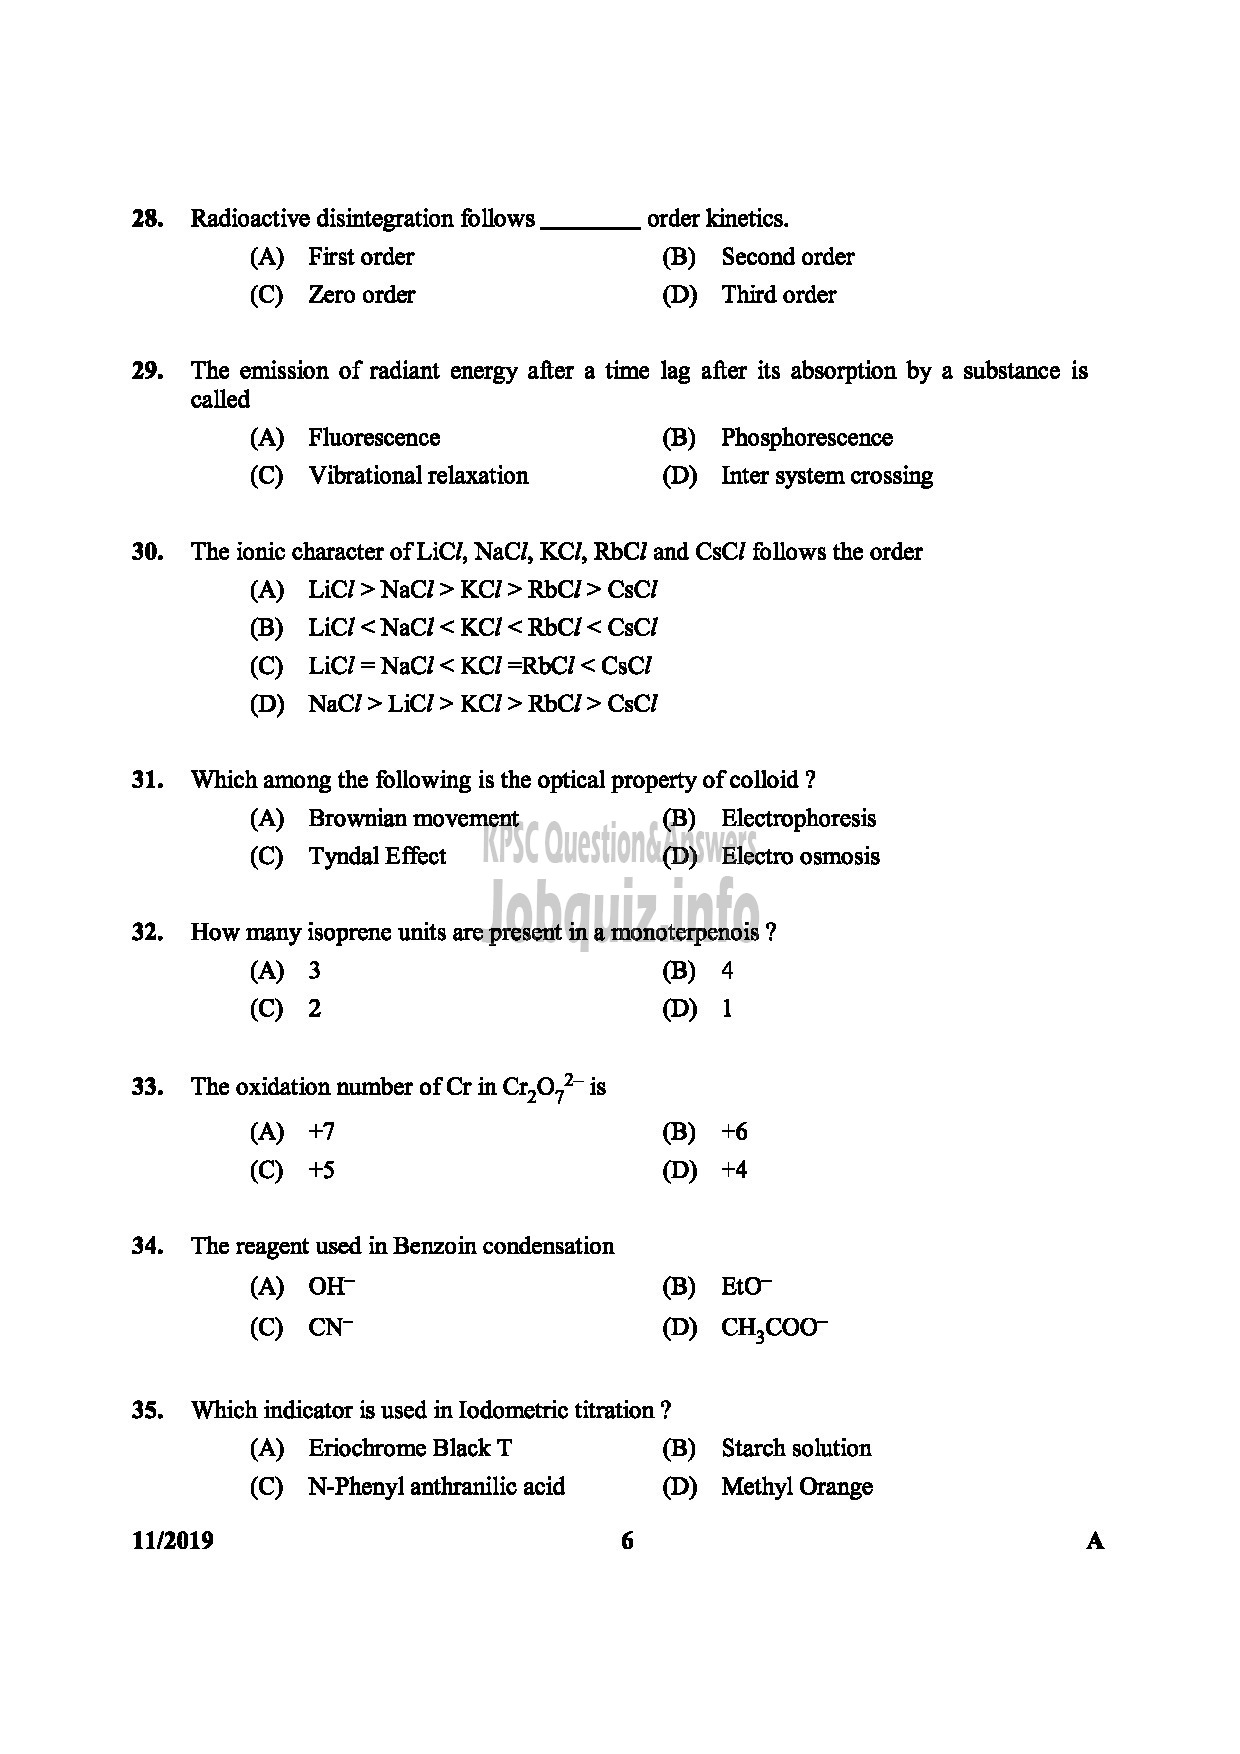 Kerala PSC Question Paper - SANITARY CHEMIST KERALA WATER AUTHORITY TECHNICAL ASSISTANT CHEMICAL EXAMINERS LABORATORY LAB ASSISTANT-6